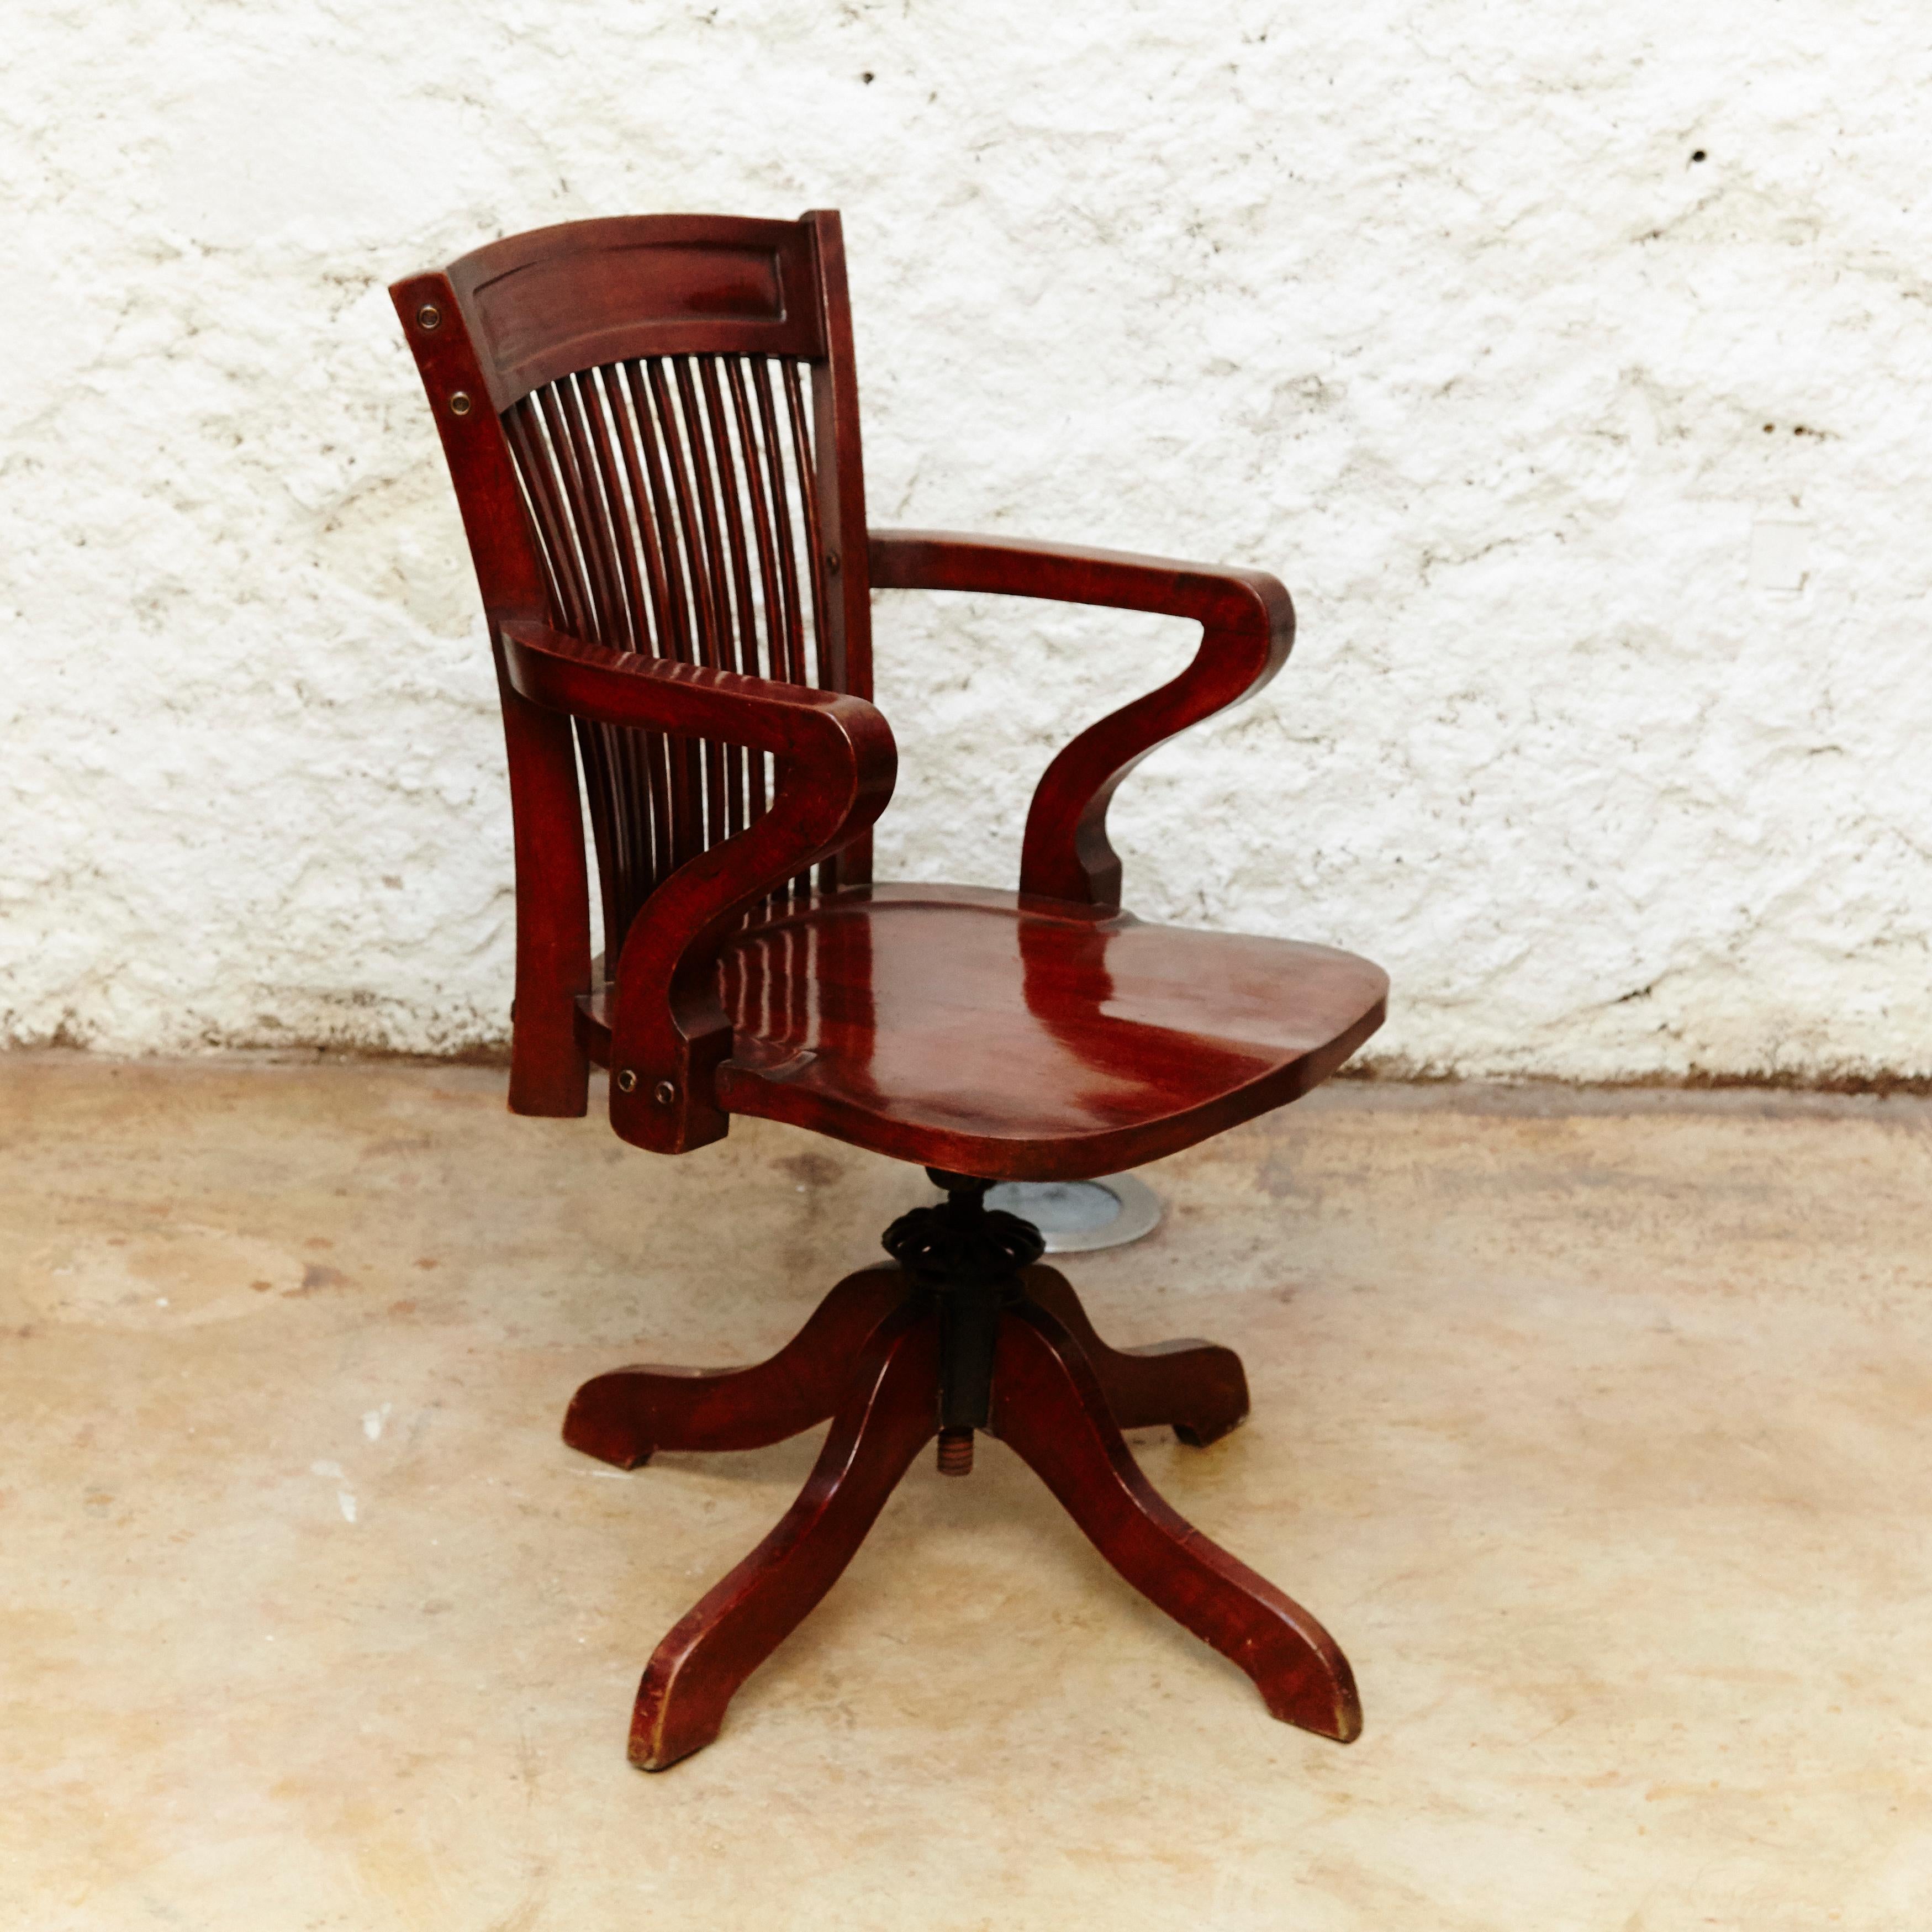 Mid-20th Century Modernist Wood Swivel Chair from Barcelona, circa 1940